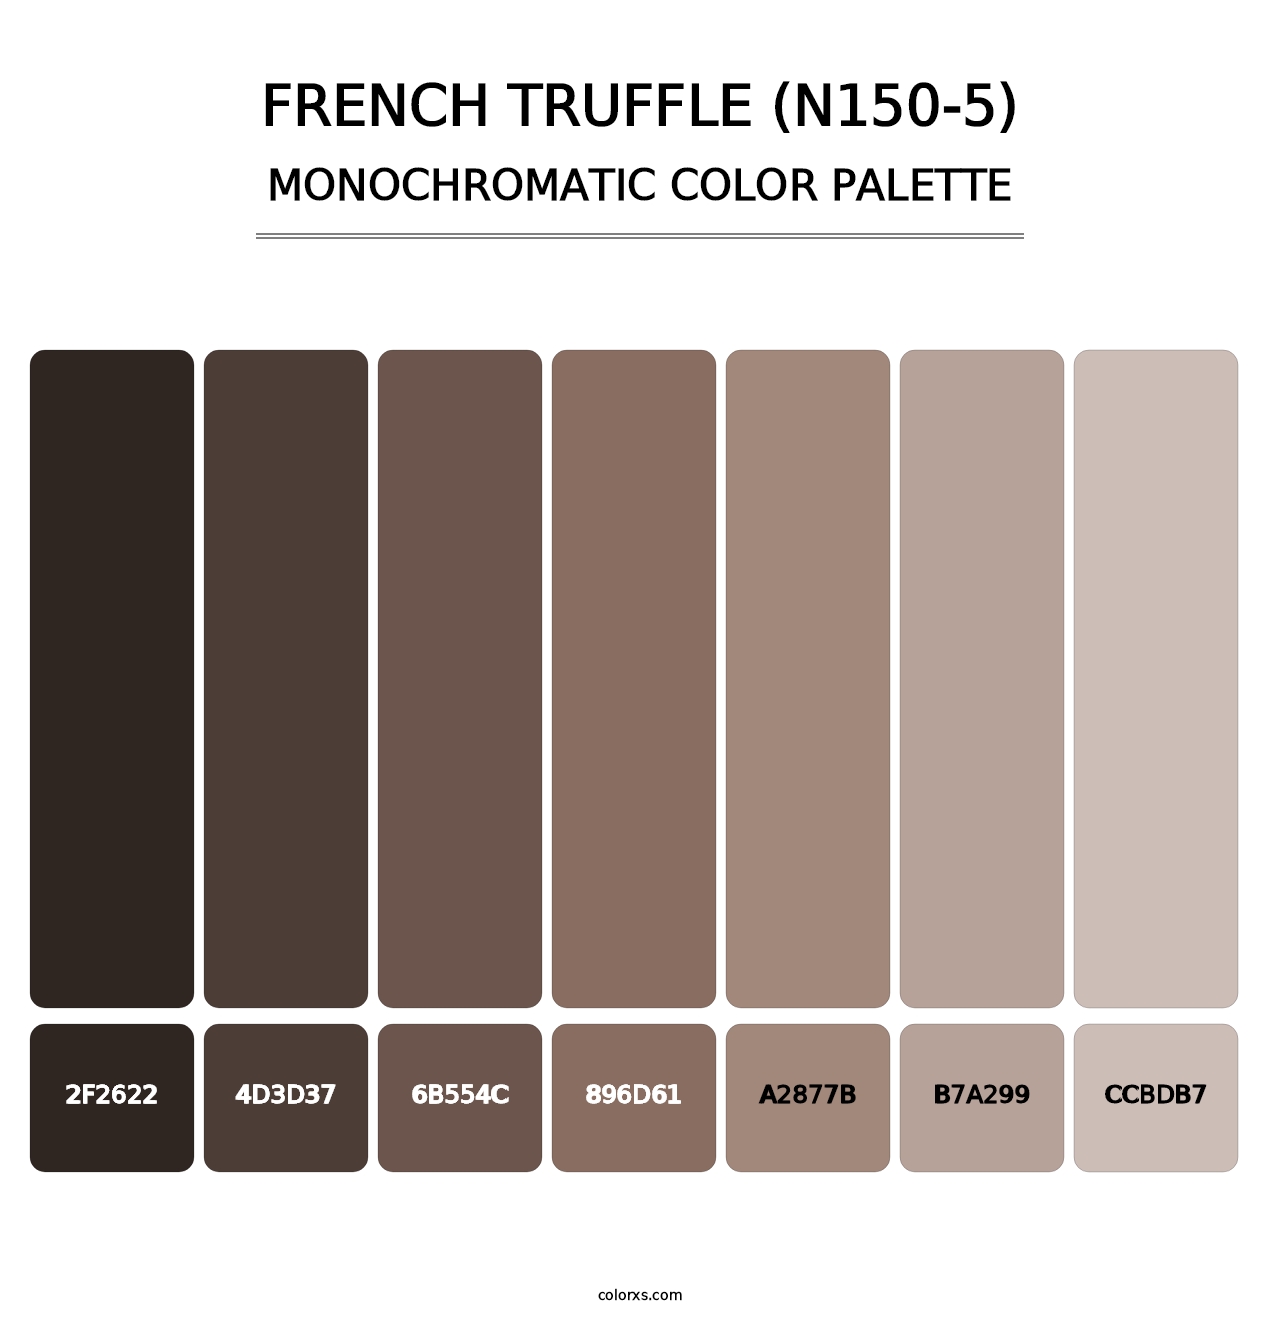 French Truffle (N150-5) - Monochromatic Color Palette